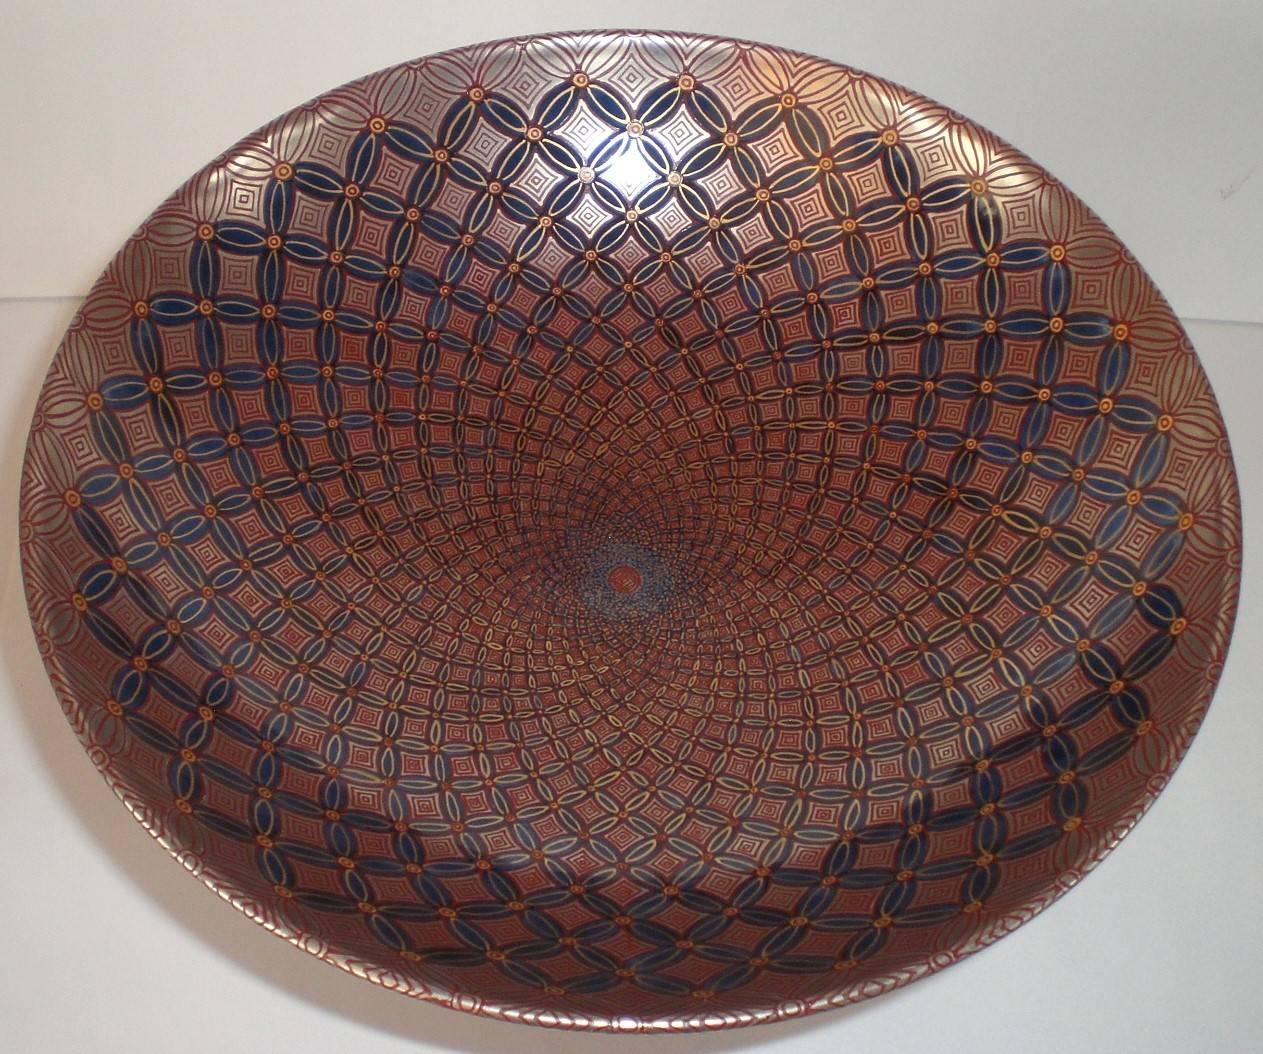 Unique Japanese gilded contemporary raised porcelain decorative bowl/centerpiece on a pedestal featuring a detailed geometric progression expressed in red and blue gilded in gold and platinum, the signed masterpiece of a second-generation porcelain